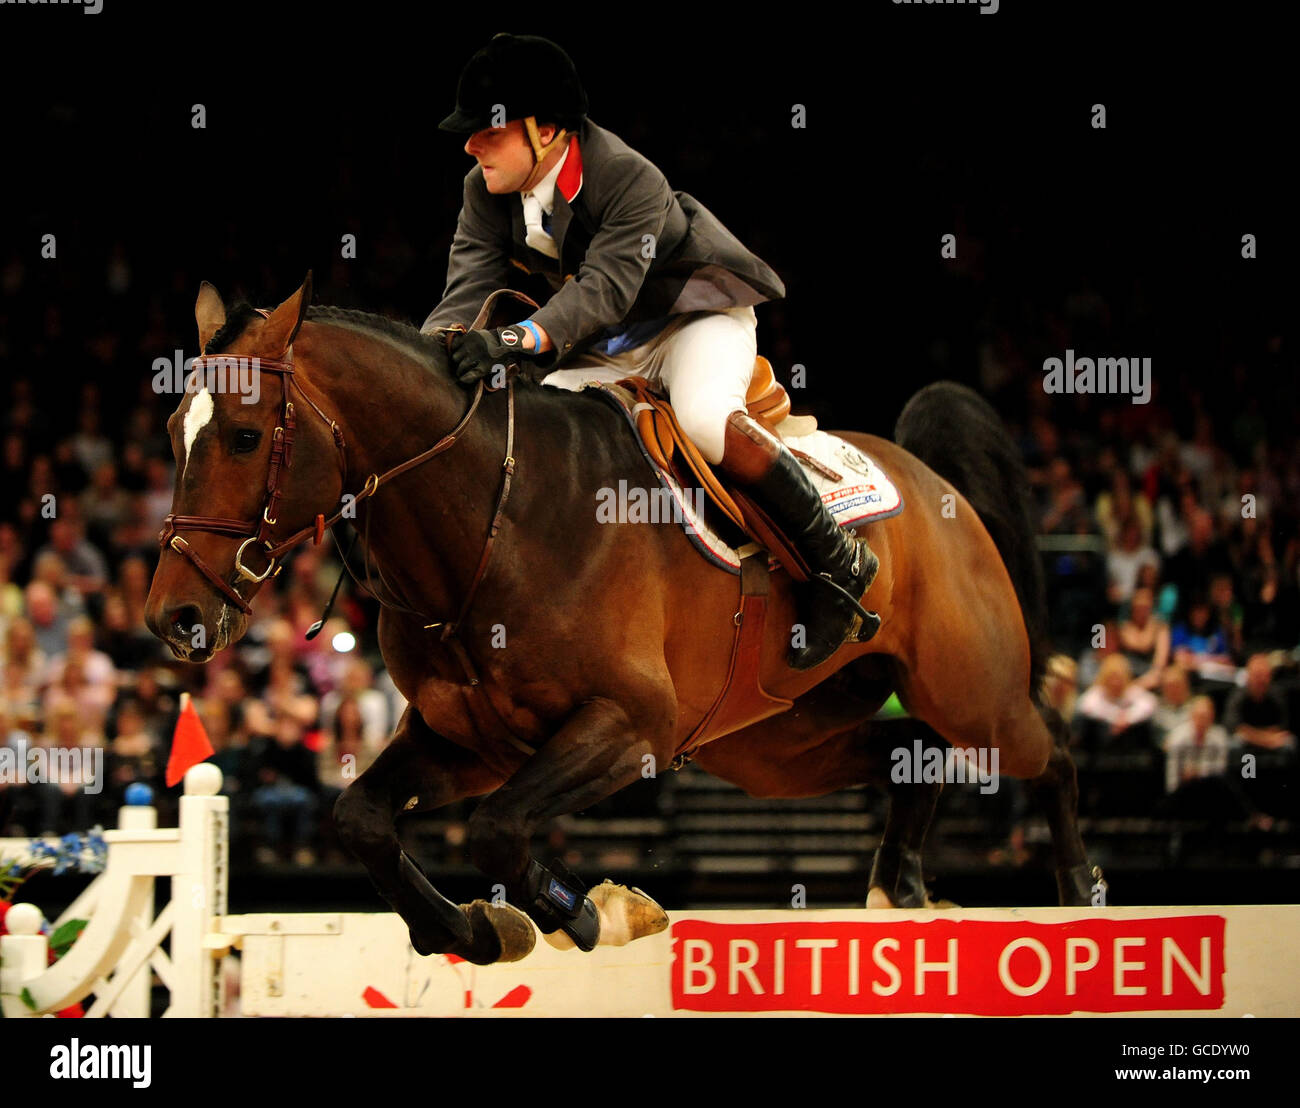 Second Place Robert Whitaker on USA Today in tonight's final of the British Open Show Jumping Championships of the British Open Show Jumping Championships at the NEC, Birmingham. Stock Photo